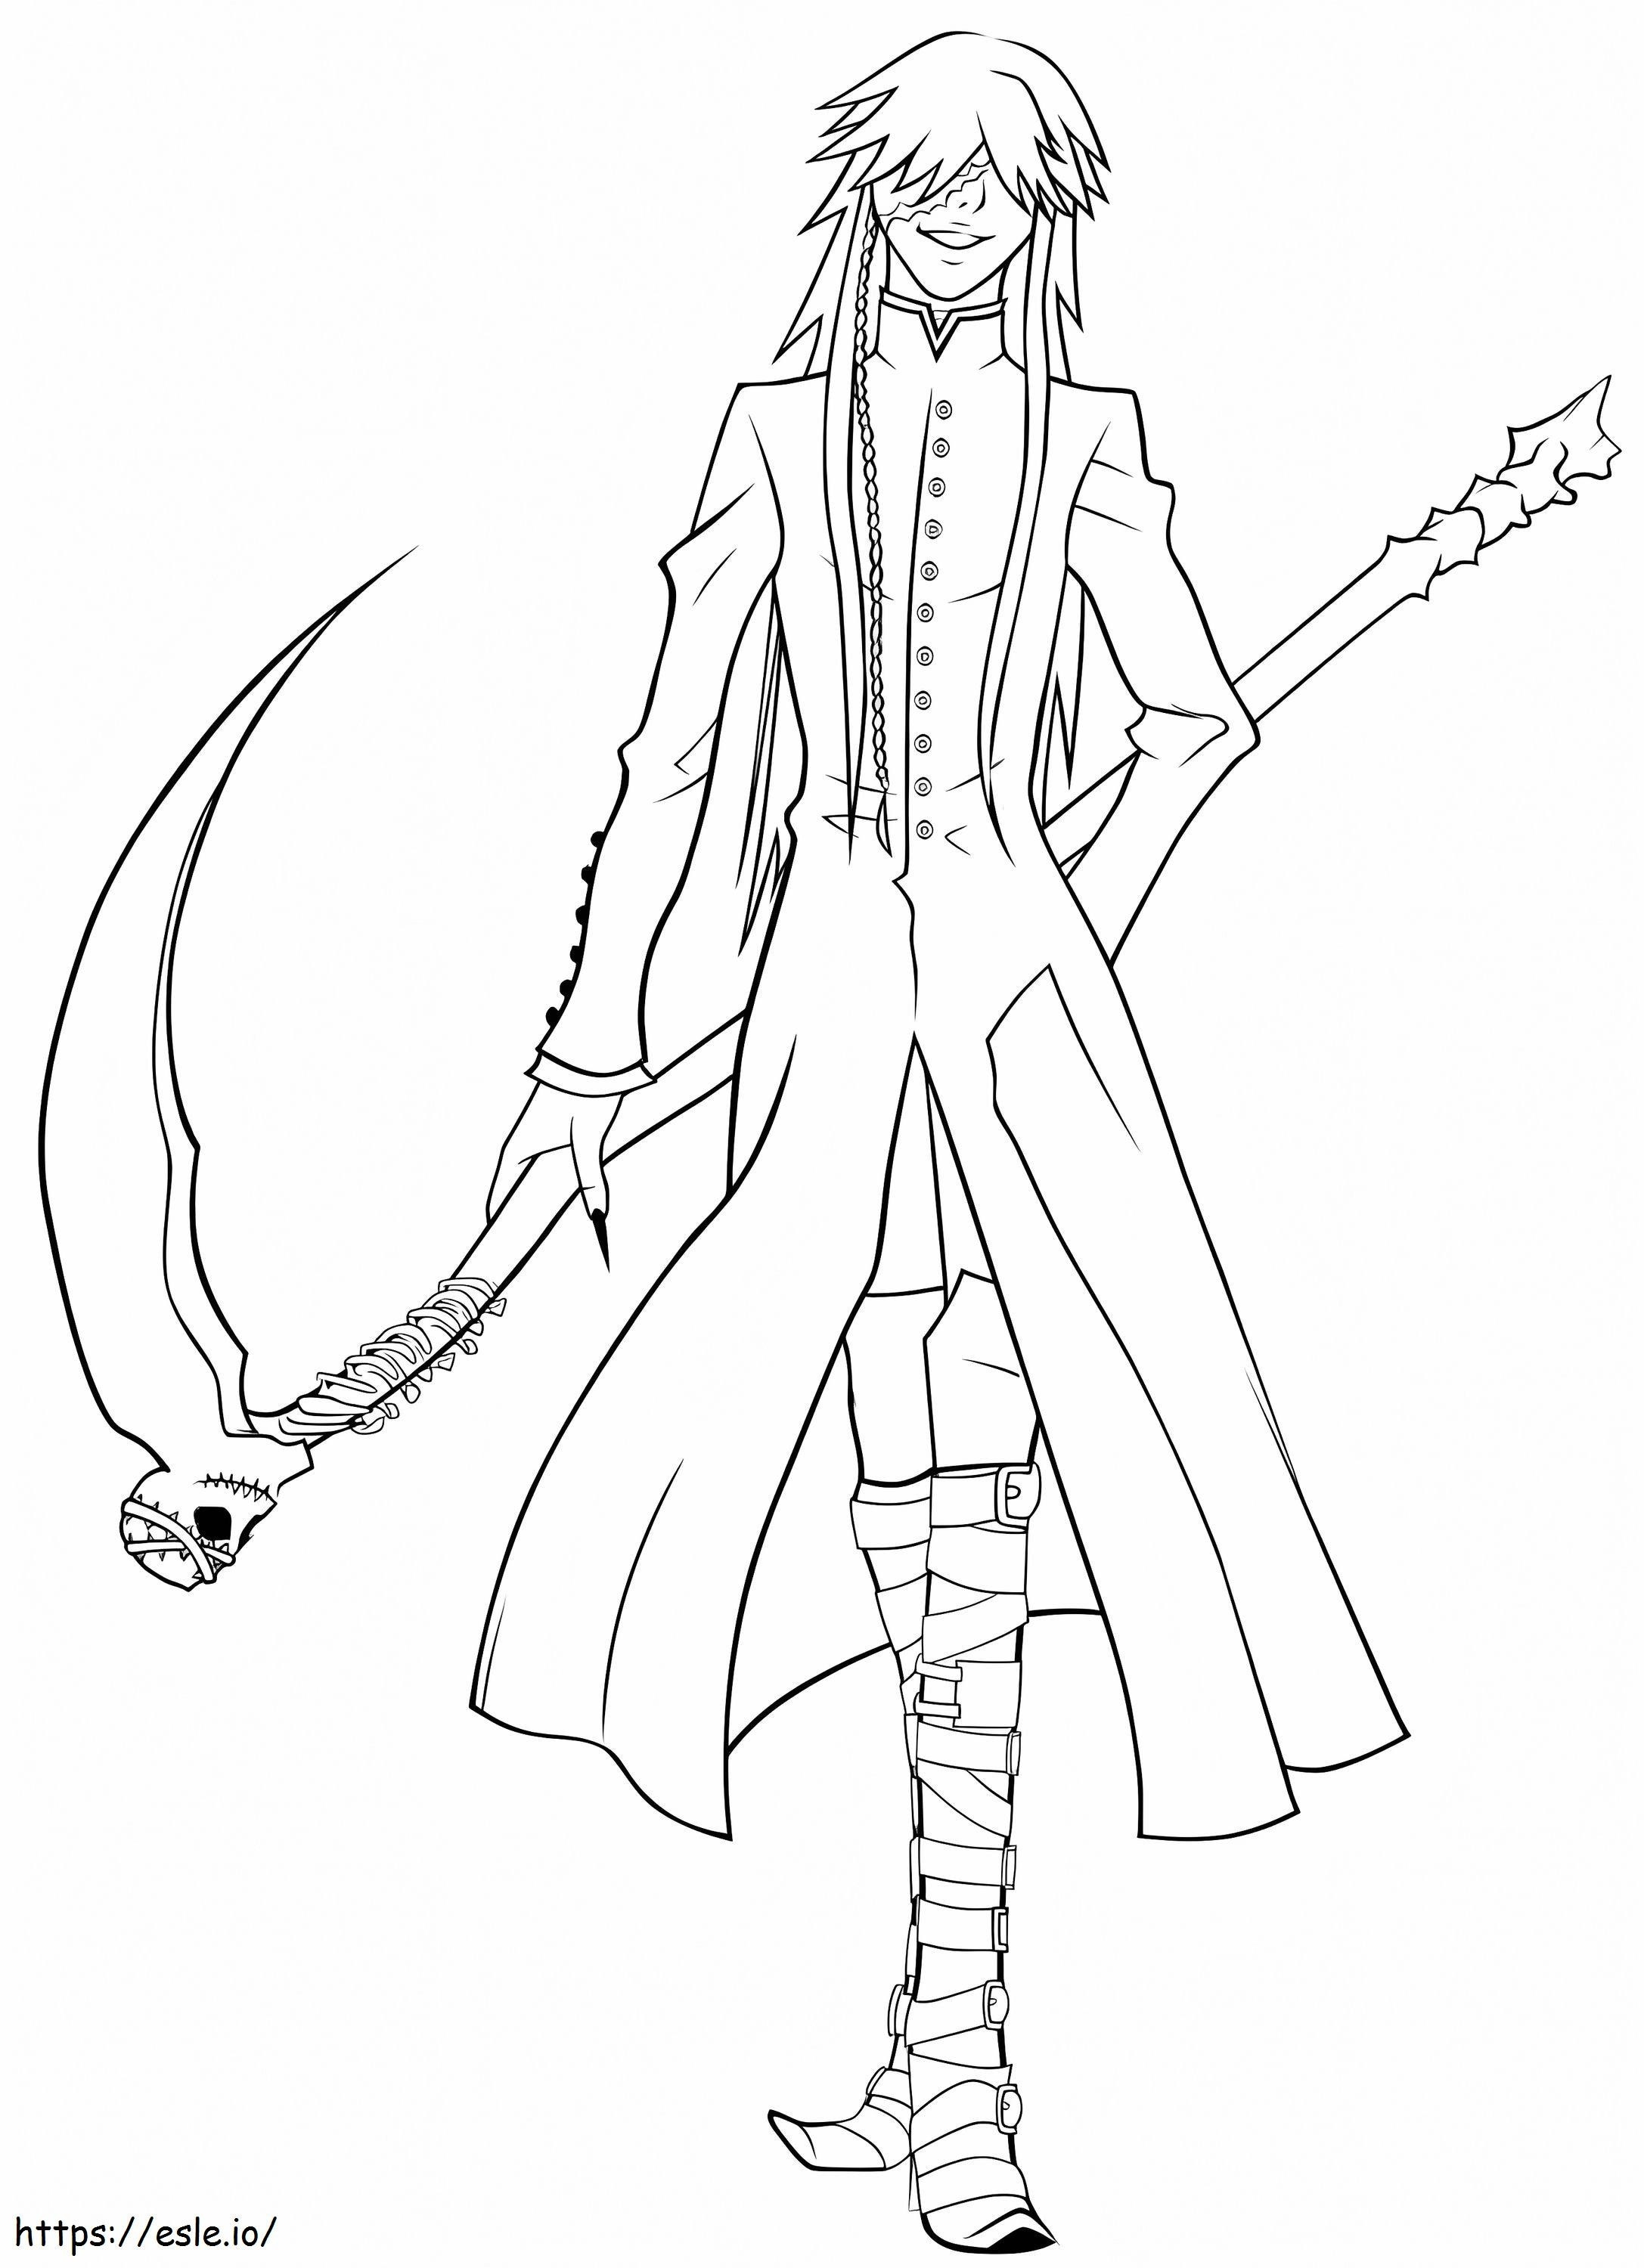 Undertaker From Black Butler coloring page